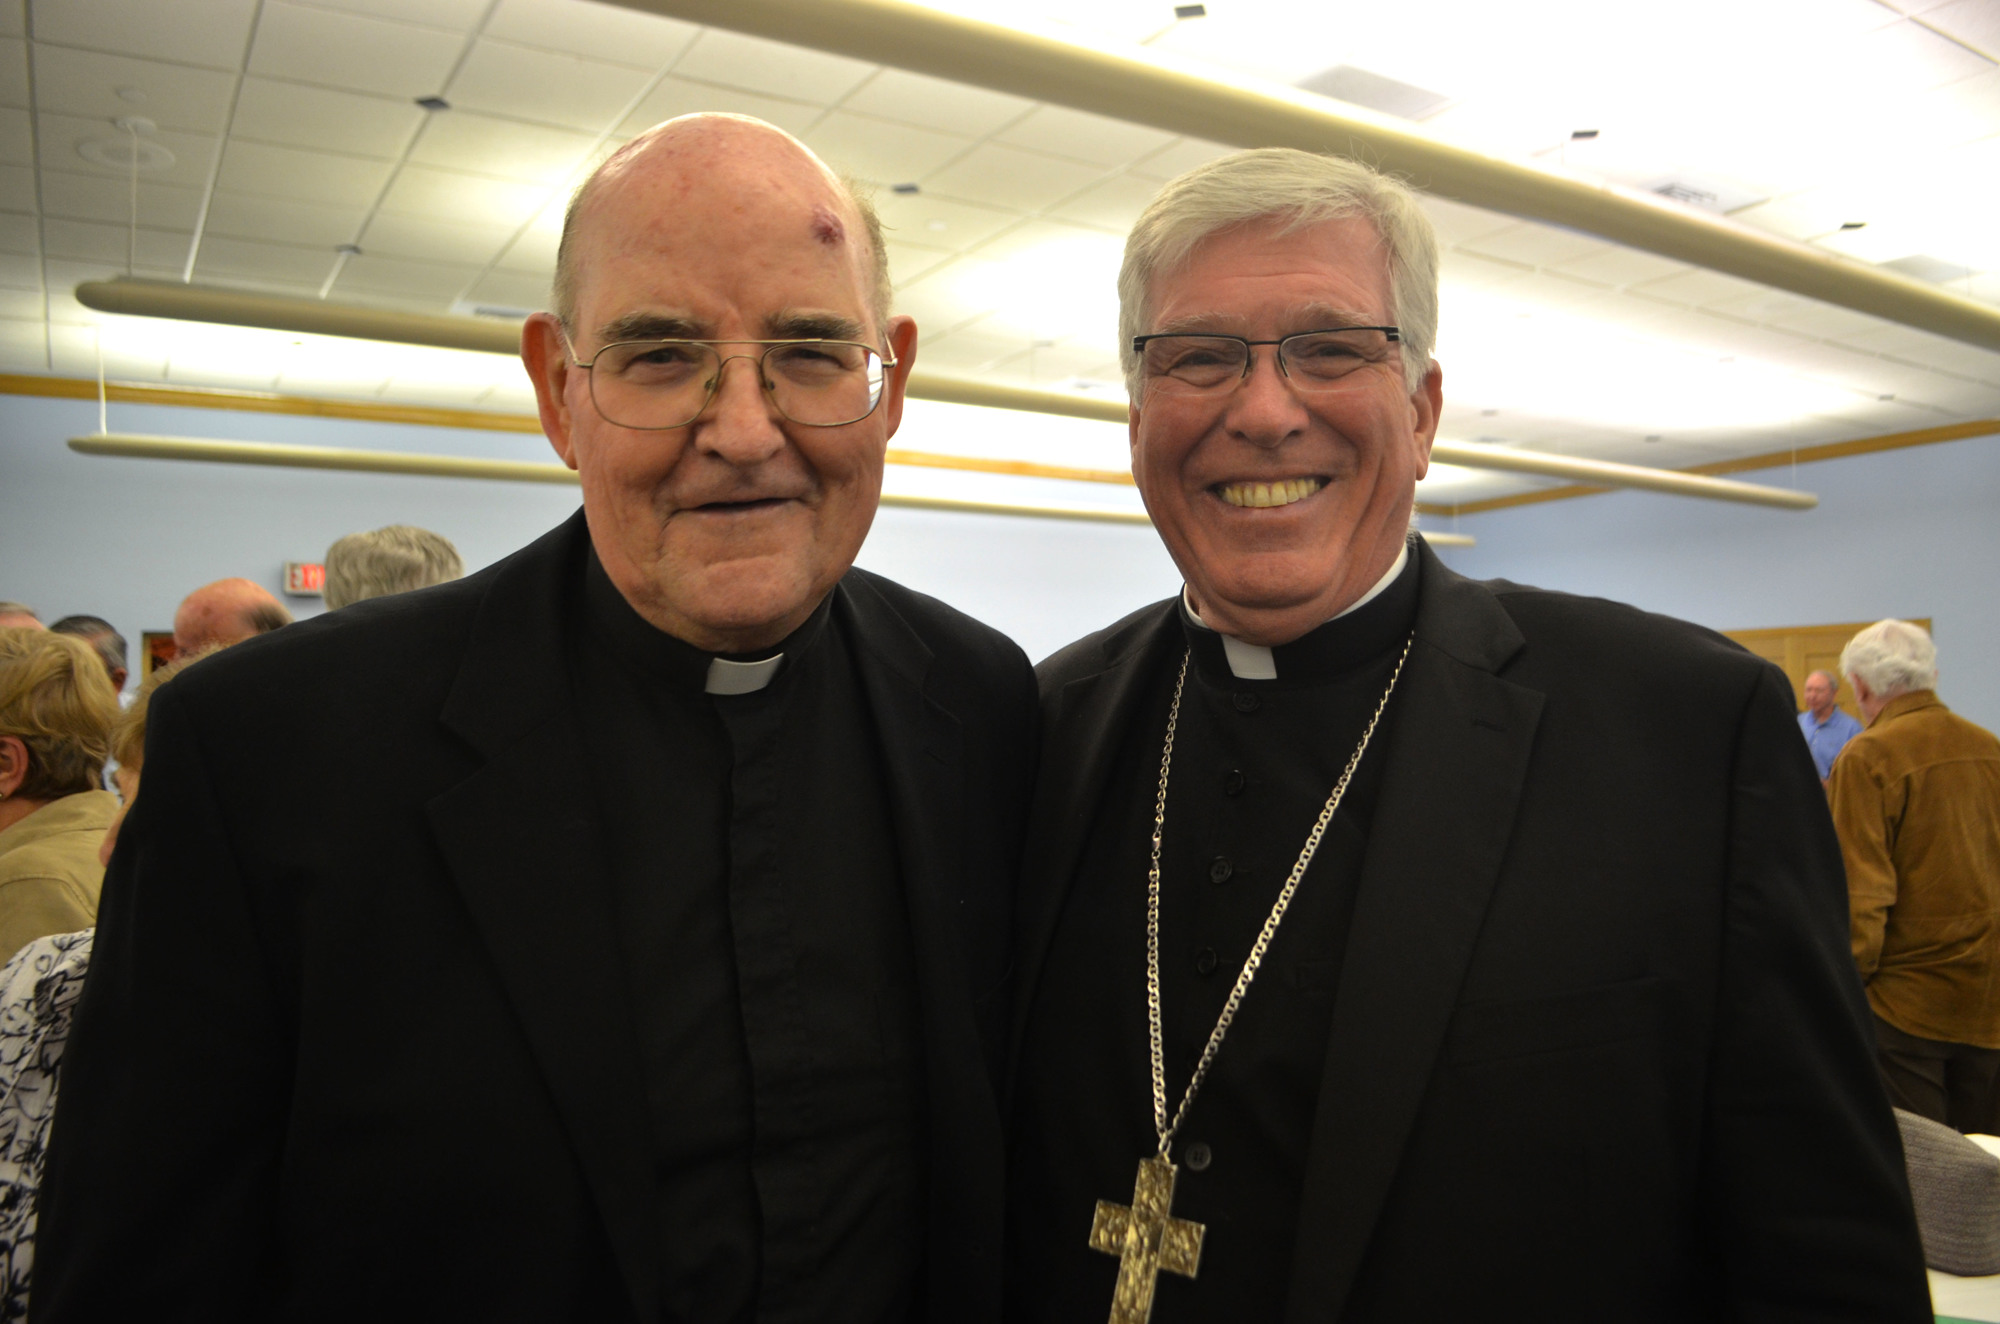 The Rev. Gerry Finegan Bishop Frank Dewane of the Diocese of Venice at Finegan's Golden Jubilee Celebration on May 7.